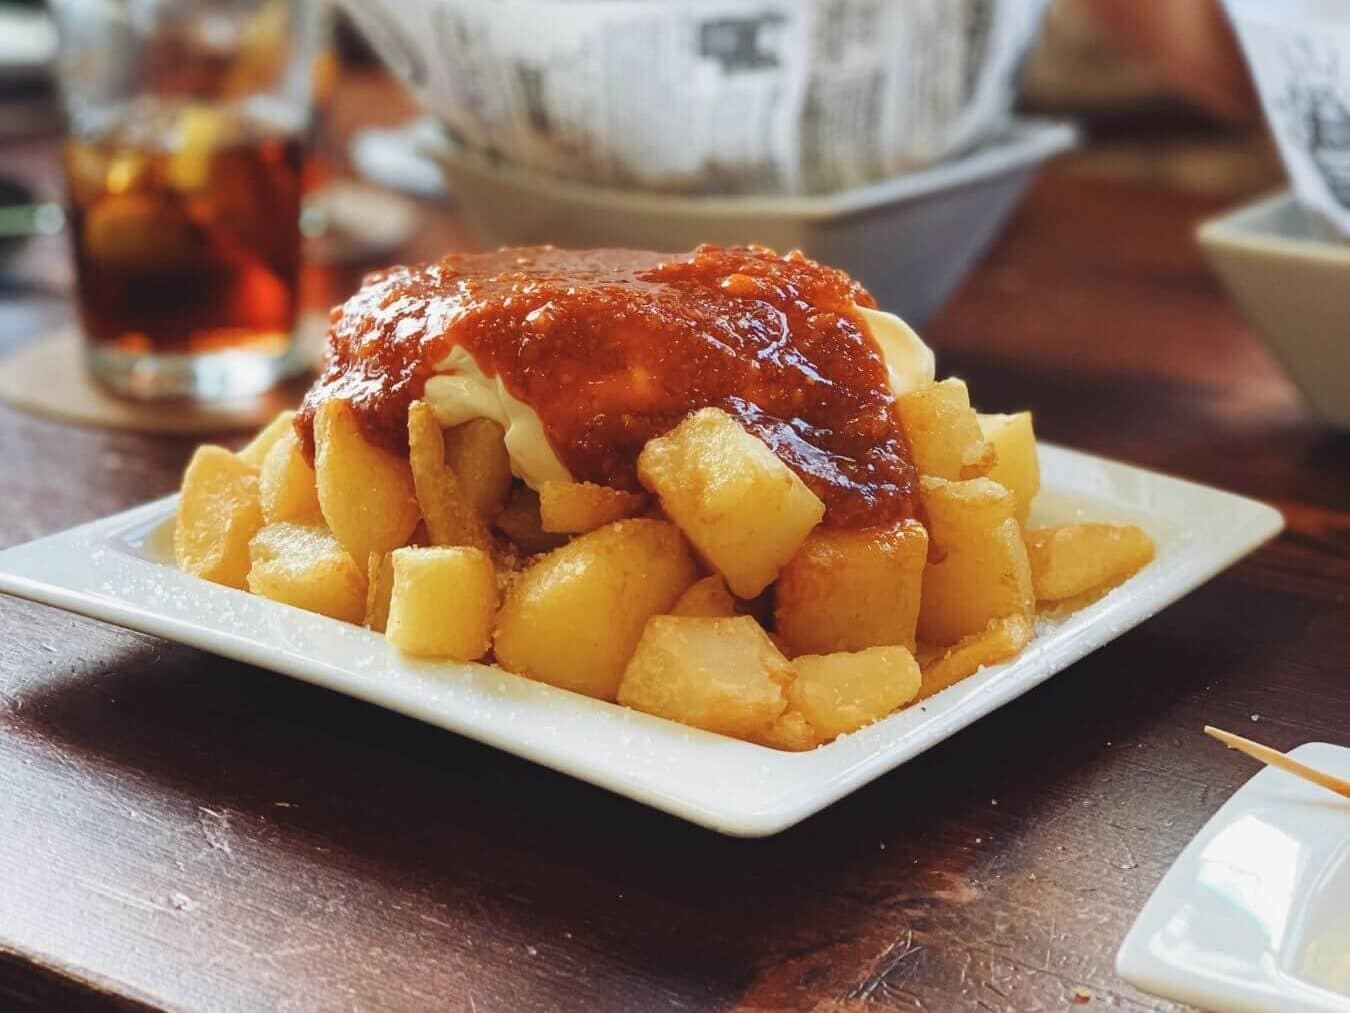 A plate of delicious patatas bravas for tapas in Madrid, Spain